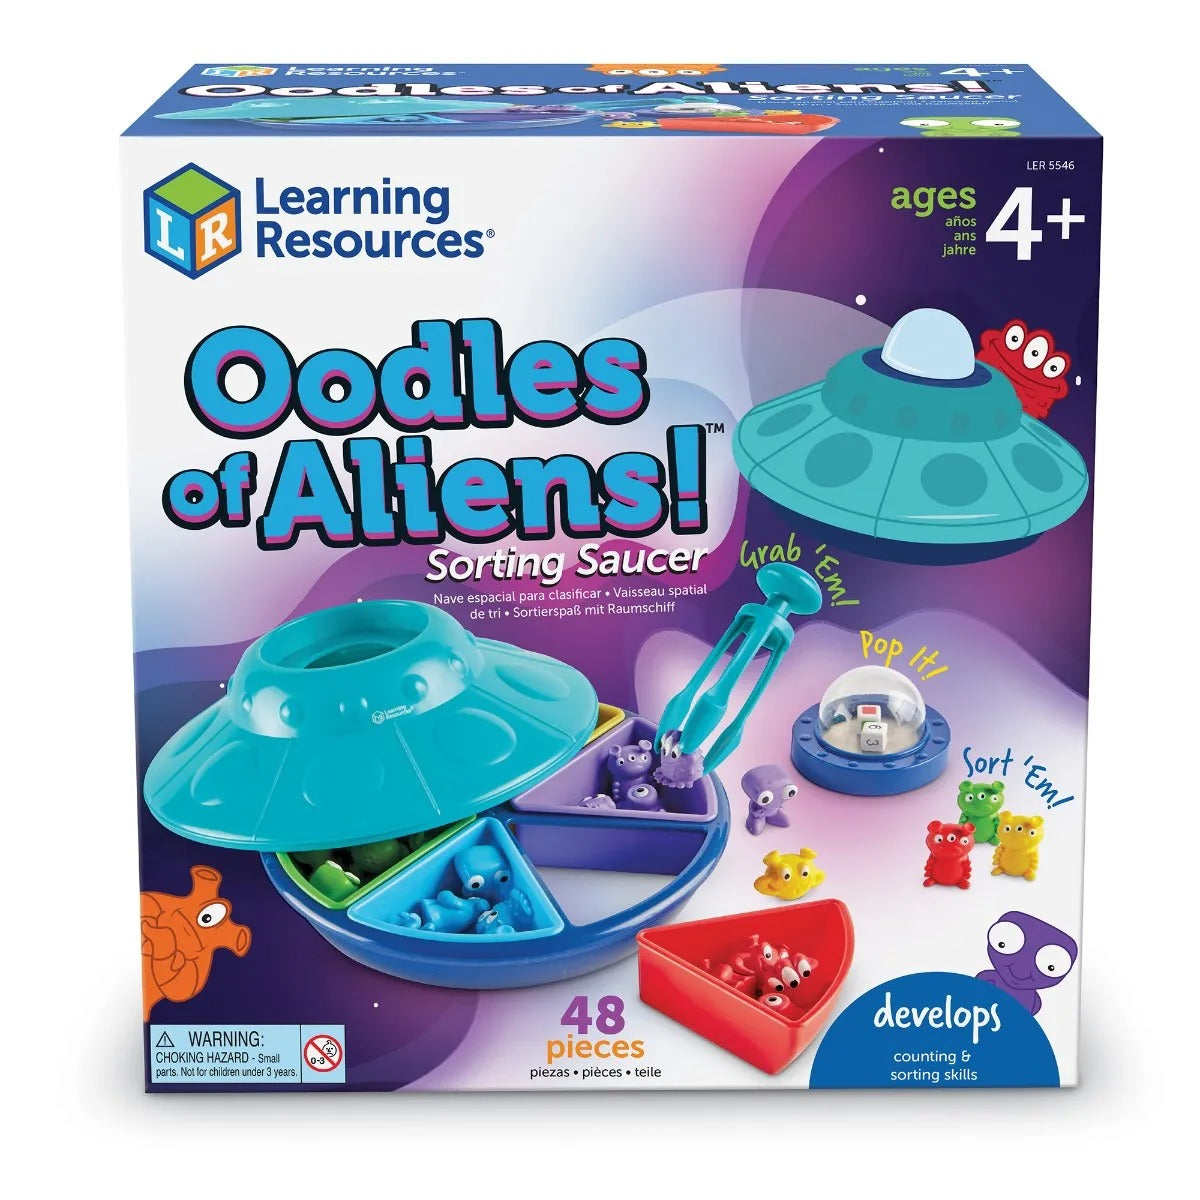 Oodles of Aliens Sorting Saucer, Add some out-of-this-world fun to grouping and sorting games, patterning activities, colour recognition, and fine motor skills activities with the Oodles of Aliens!™ Sorting Saucer game. The Oodles of Aliens Sorting Saucer is great for playing in the classroom or at home, this colourful game set includes a 2-piece spaceship with sorting trays, popper top with colour and number dice, Tri-Grip Tong, 30 colourful, squishy, alien counters, and a game board. Build sorting, groupi